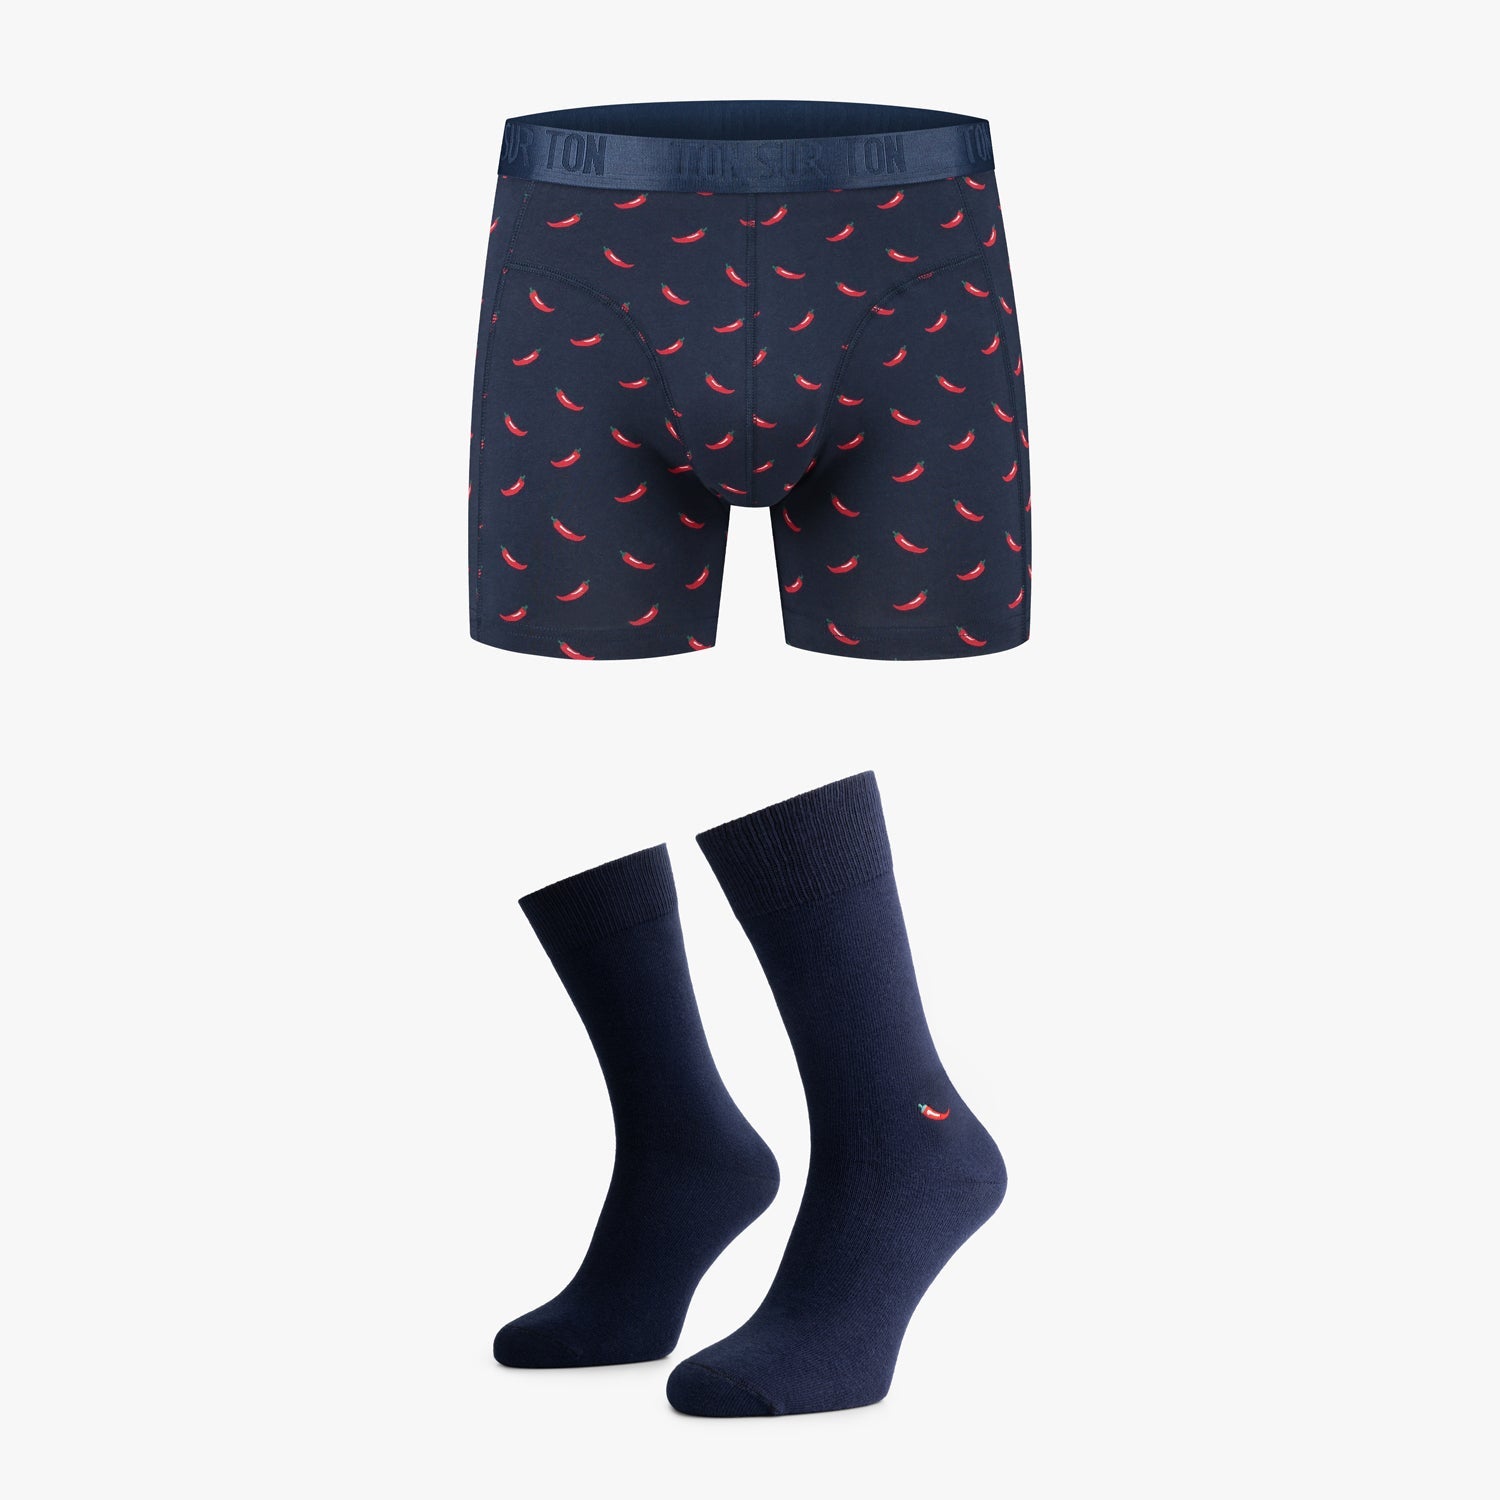 Red Hot - Organic Cotton Boxer Briefs and Socks